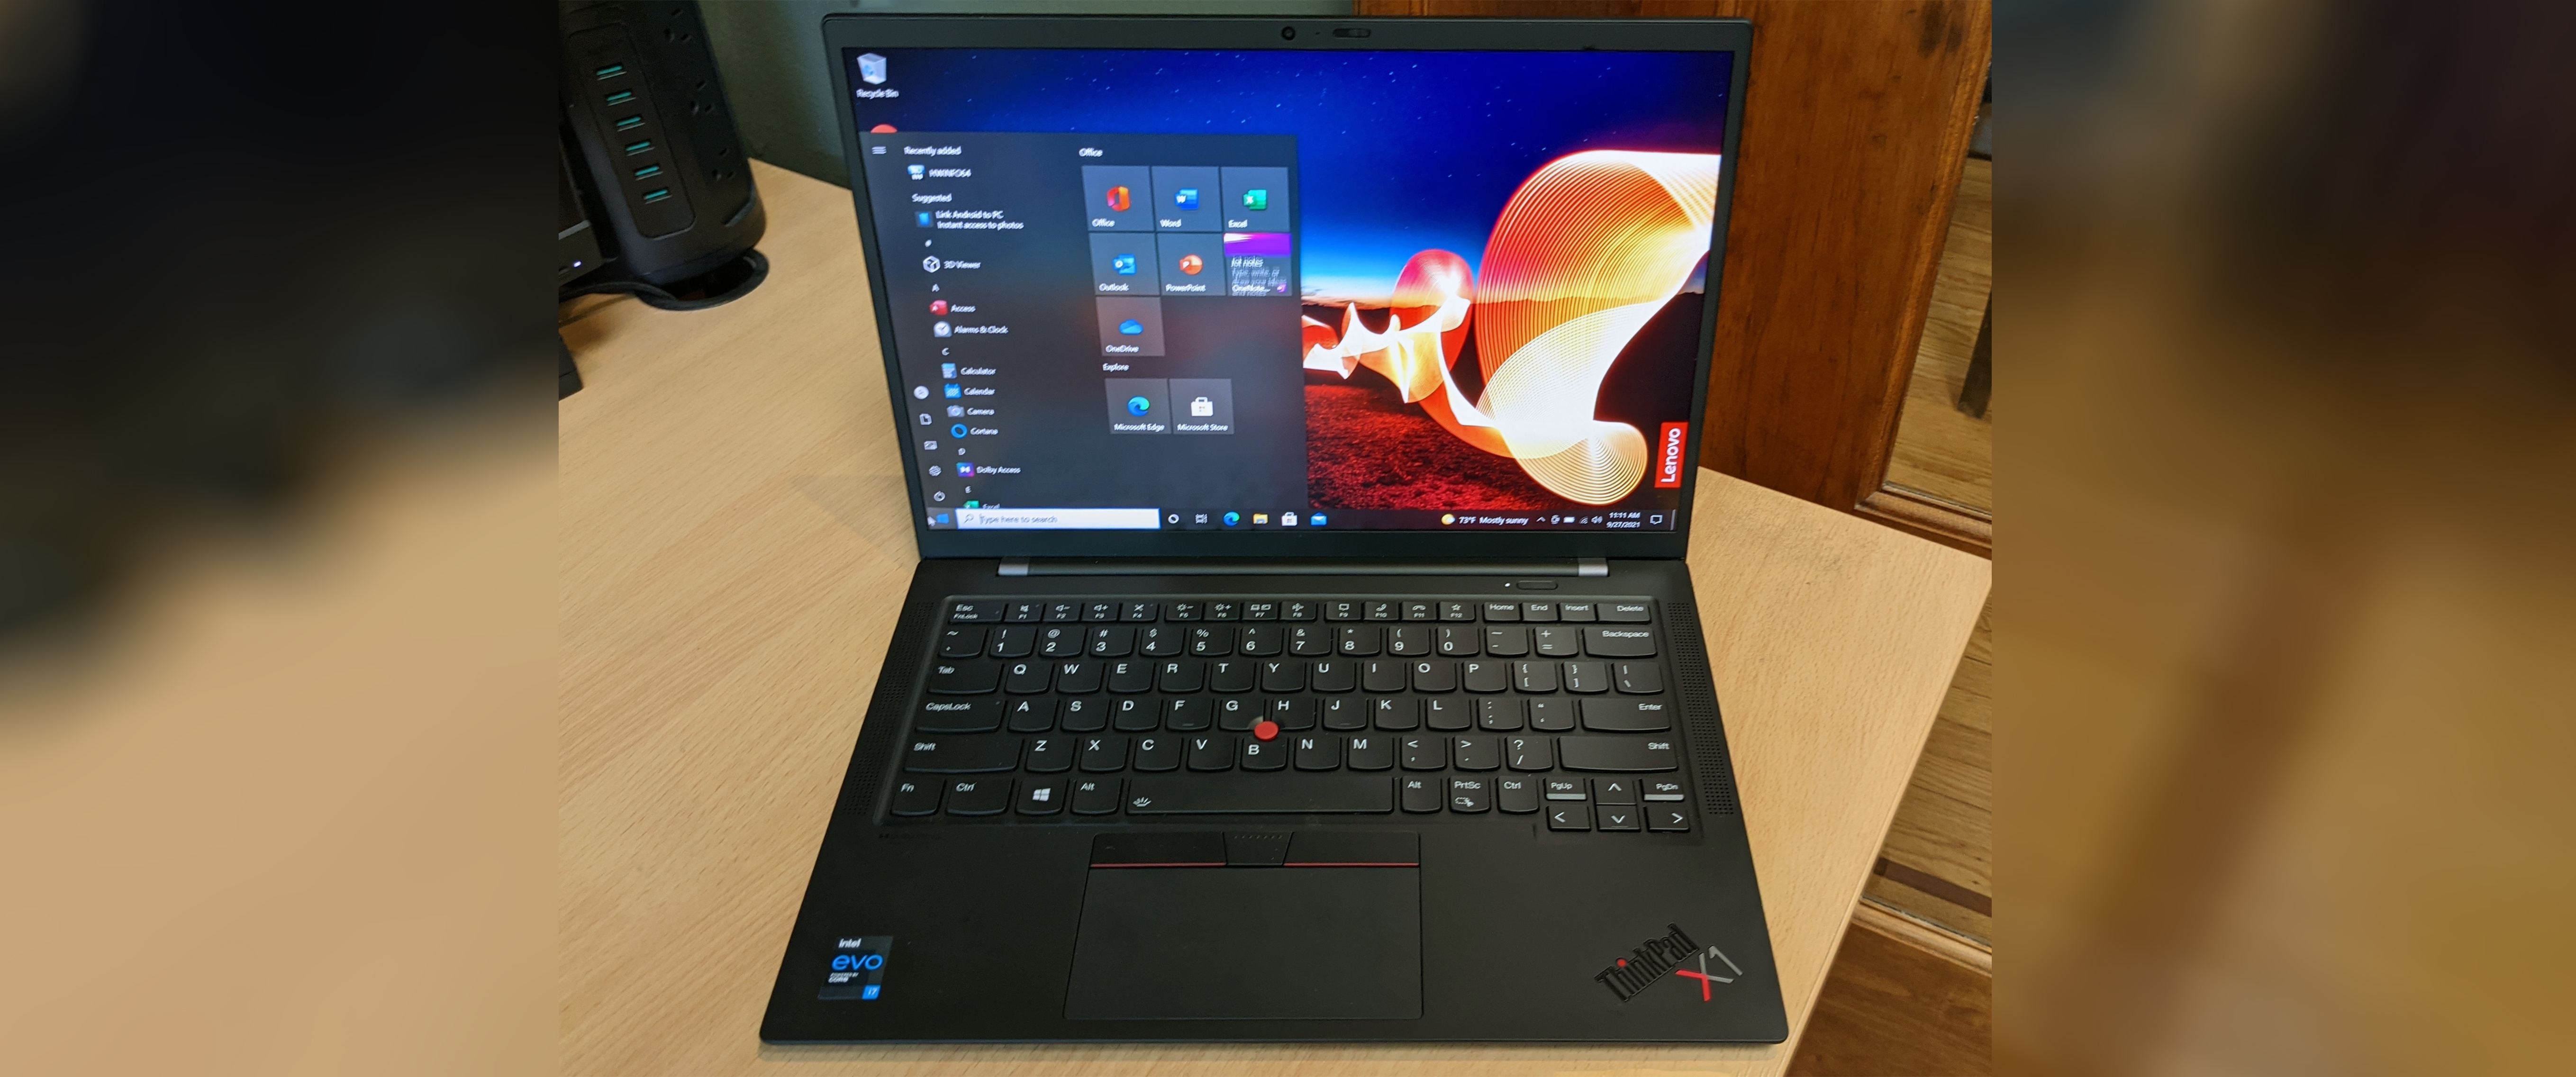 Lenovo ThinkPad X1 Carbon (Gen 9) Review: Even More Productivity Prowess |  Tom's Hardware